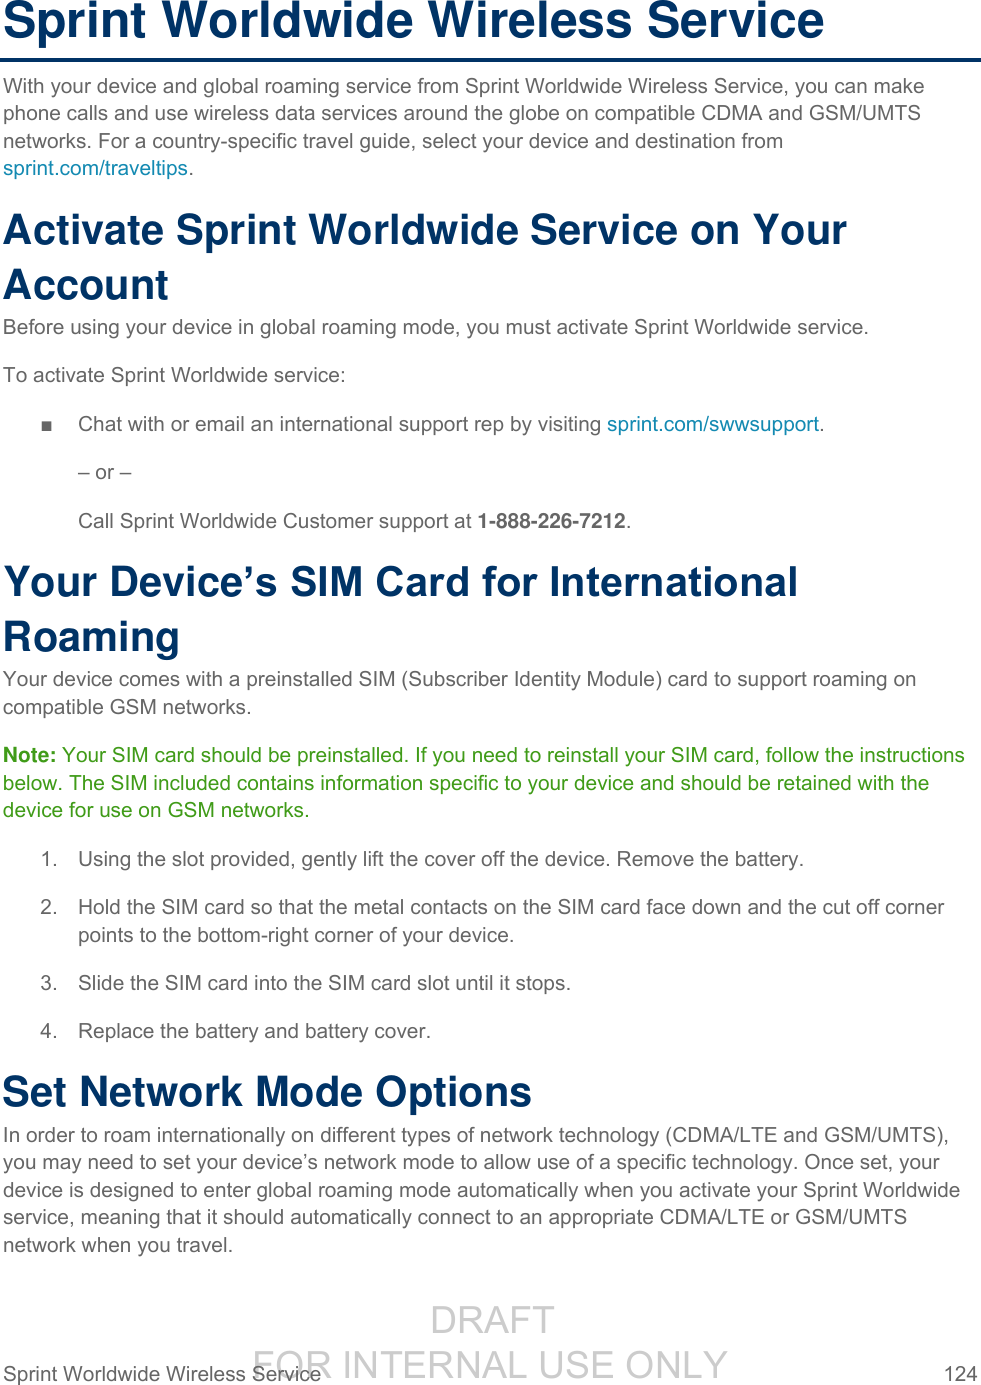                  DRAFT FOR INTERNAL USE ONLY Sprint Worldwide Wireless Service  124   Sprint Worldwide Wireless Service With your device and global roaming service from Sprint Worldwide Wireless Service, you can make phone calls and use wireless data services around the globe on compatible CDMA and GSM/UMTS networks. For a country-specific travel guide, select your device and destination from sprint.com/traveltips. Activate Sprint Worldwide Service on Your Account  Before using your device in global roaming mode, you must activate Sprint Worldwide service.  To activate Sprint Worldwide service: ■  Chat with or email an international support rep by visiting sprint.com/swwsupport. – or – Call Sprint Worldwide Customer support at 1-888-226-7212.  Your Device’s SIM Card for International Roaming Your device comes with a preinstalled SIM (Subscriber Identity Module) card to support roaming on compatible GSM networks. Note: Your SIM card should be preinstalled. If you need to reinstall your SIM card, follow the instructions below. The SIM included contains information specific to your device and should be retained with the device for use on GSM networks. 1.  Using the slot provided, gently lift the cover off the device. Remove the battery. 2.  Hold the SIM card so that the metal contacts on the SIM card face down and the cut off corner points to the bottom-right corner of your device. 3.  Slide the SIM card into the SIM card slot until it stops. 4.  Replace the battery and battery cover.  Set Network Mode Options In order to roam internationally on different types of network technology (CDMA/LTE and GSM/UMTS), you may need to set your device’s network mode to allow use of a specific technology. Once set, your device is designed to enter global roaming mode automatically when you activate your Sprint Worldwide service, meaning that it should automatically connect to an appropriate CDMA/LTE or GSM/UMTS network when you travel. 